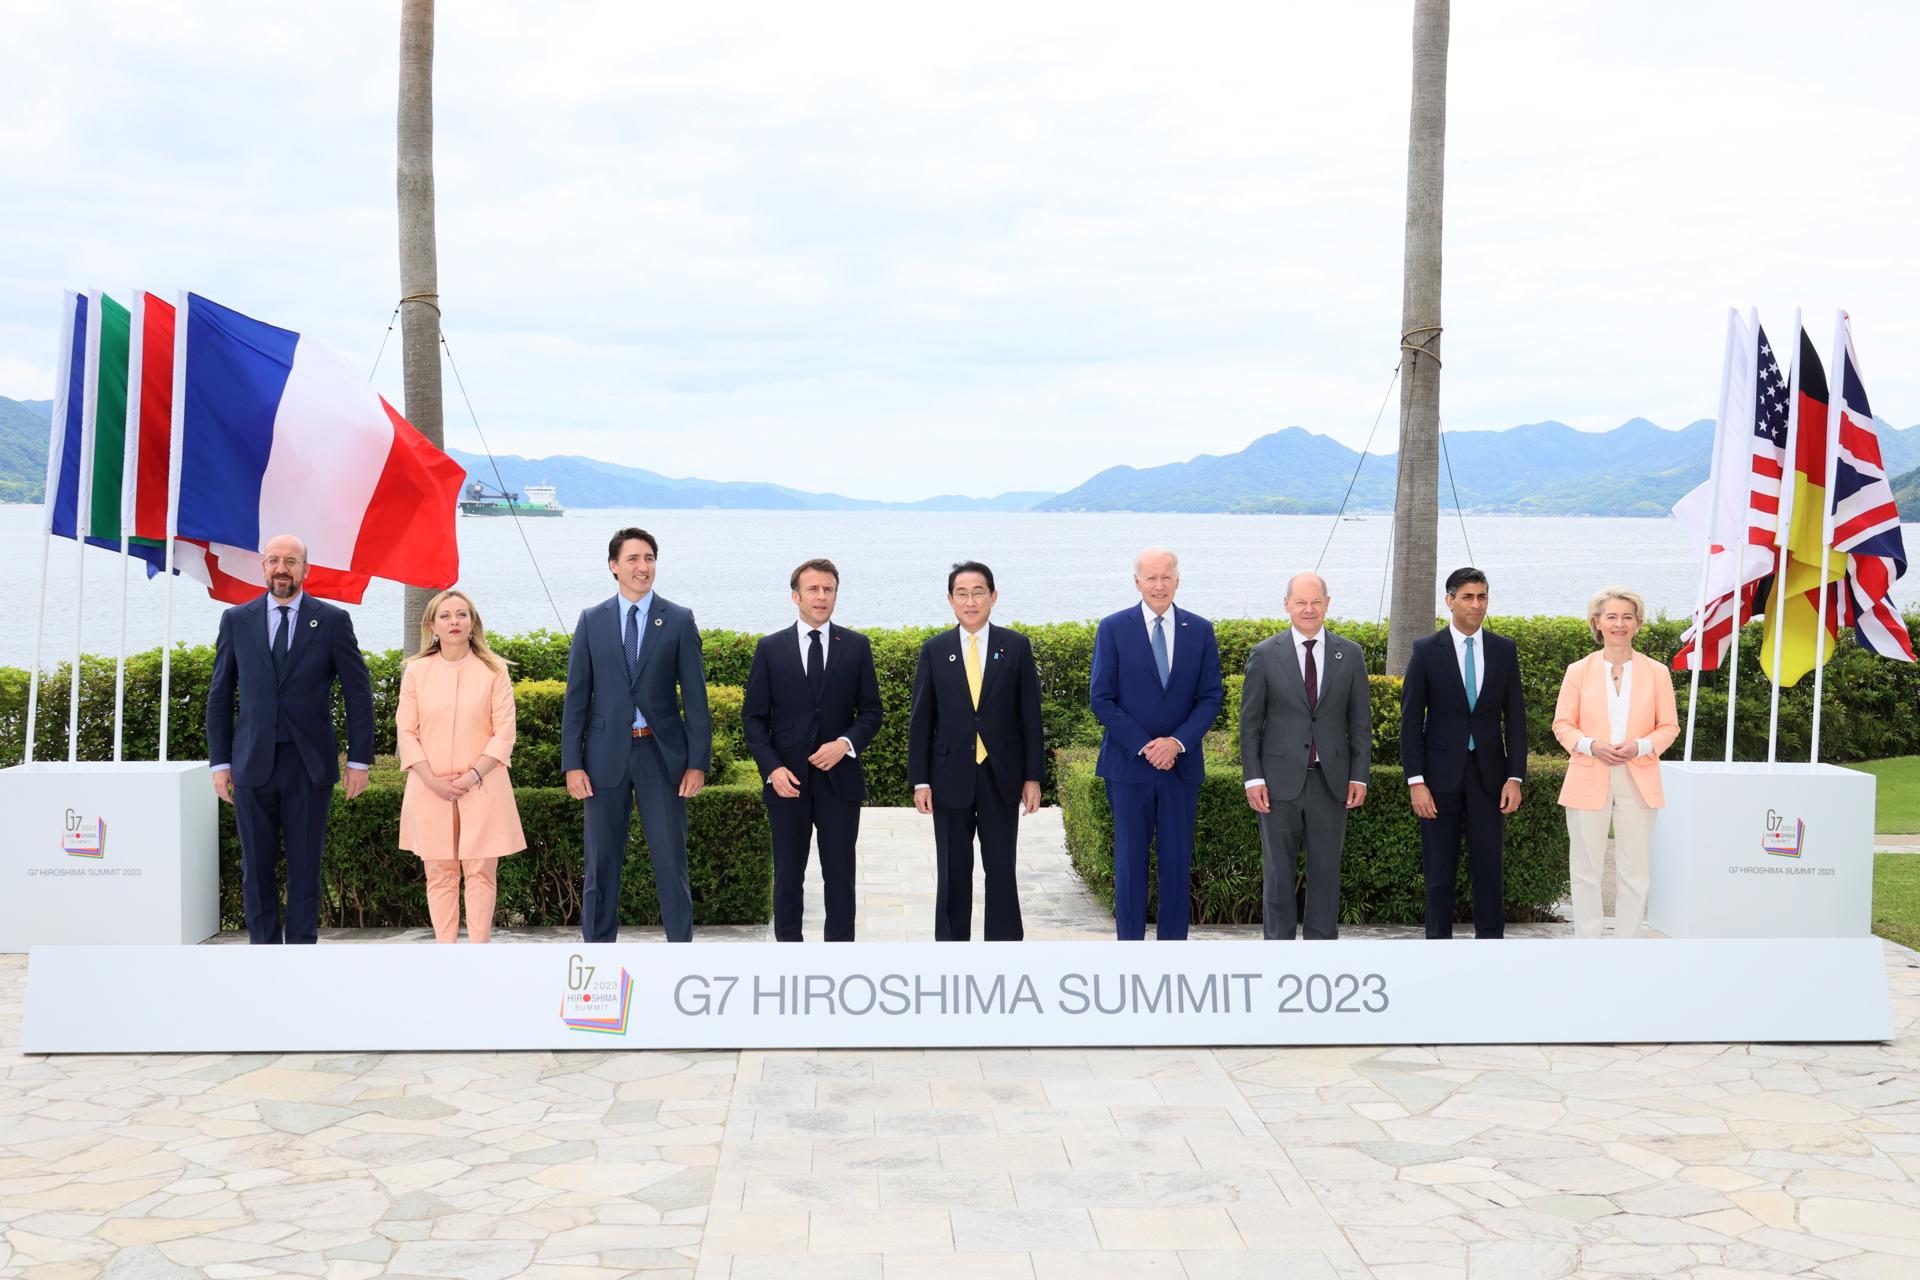 A handout photo made available by the G7 Hiroshima Summit Host shows (L-R) European Council President Charles Michel, Italian Prime Minister Giorgia Meloni, Canadian Prime Minister Justin Trudeau, French President Emmanuel Macron, Japan'Äôs Prime Minister Fumio Kishida, US President Joe Biden, German Chancellor Olaf Scholz, British Prime Minister Rishi Sunak and European Commission President Ursula von der Leyen posing for a group photo at the Grand Prince Hotel Hiroshima during the G7 Hiroshima Summit in Hiroshima, Japan, 20 May 2023. EFE/EPA/G7 Hiroshima Summit Host / HANDOUT HANDOUT EDITORIAL USE ONLY/NO SALES